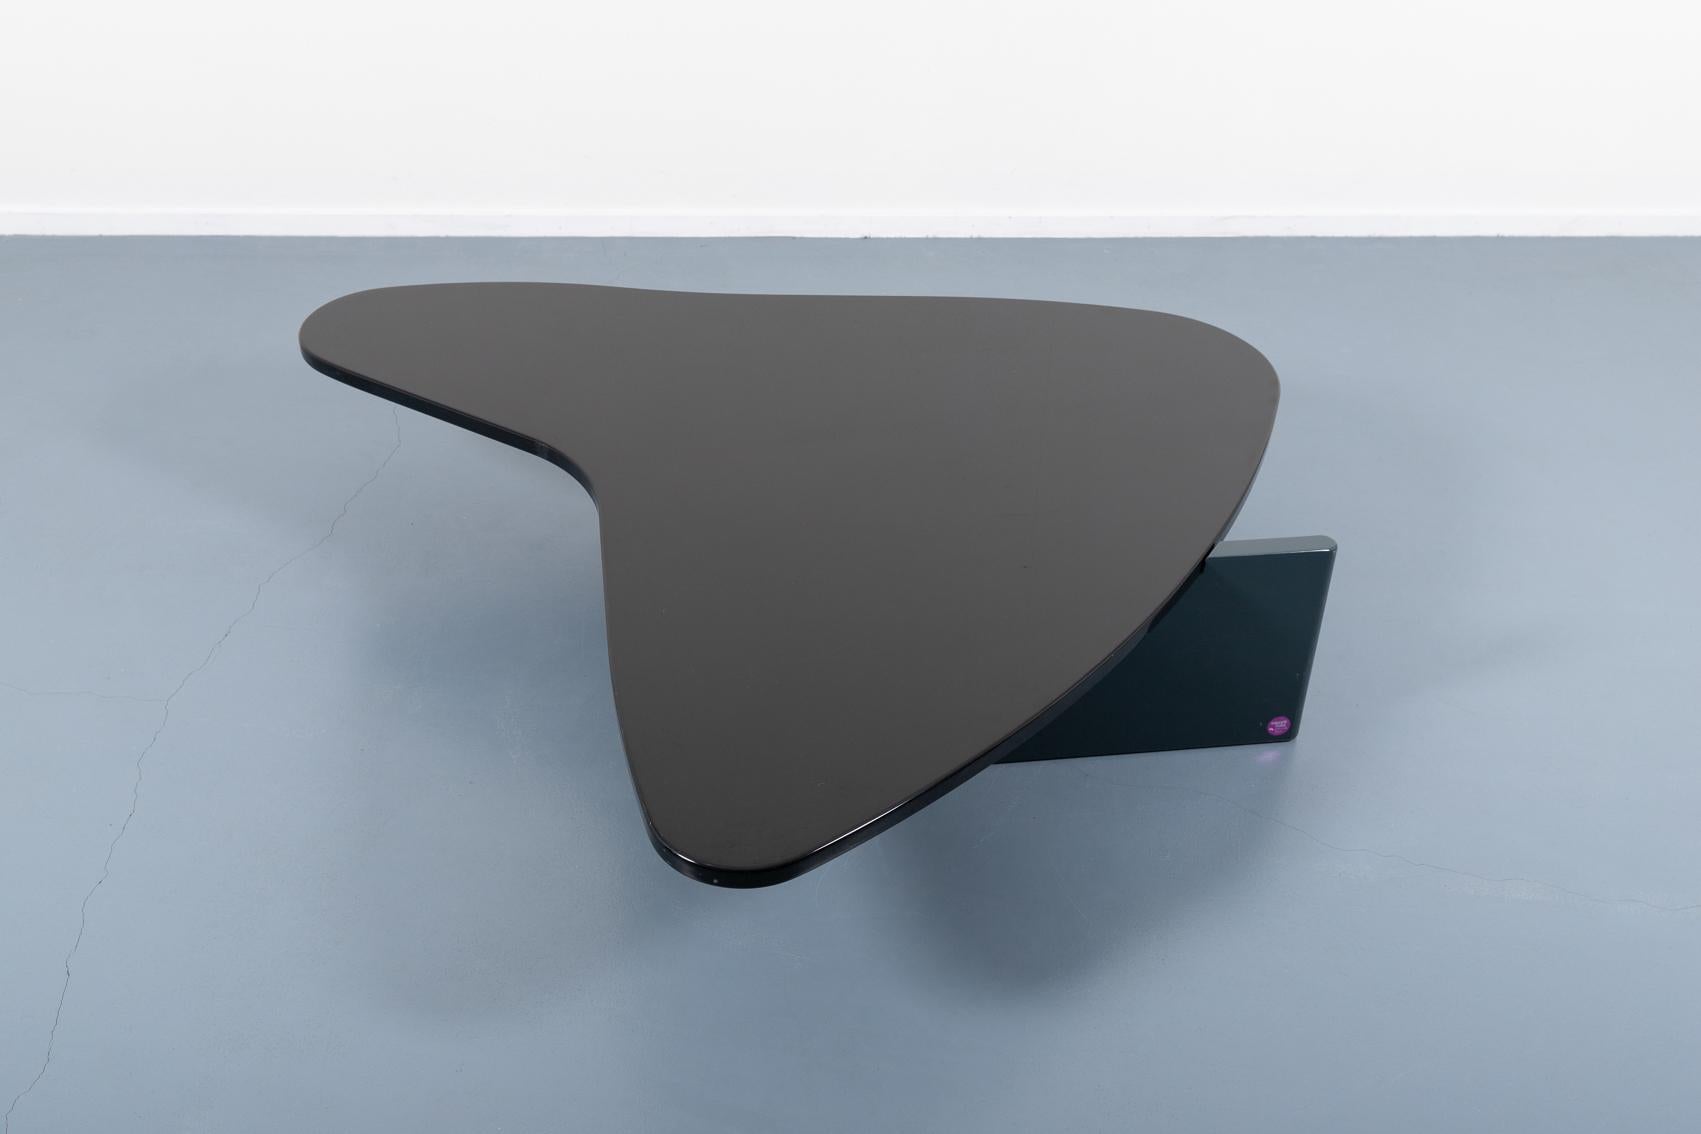 Free form unique coffee table designed by Maurizio Salvato in 1980’s and produced by Saporiti Italia. Rounded triangle-like black lacquered top with different colour legs.

Condition
Age related wear and usage marks.

Dimensions
height: 14,17